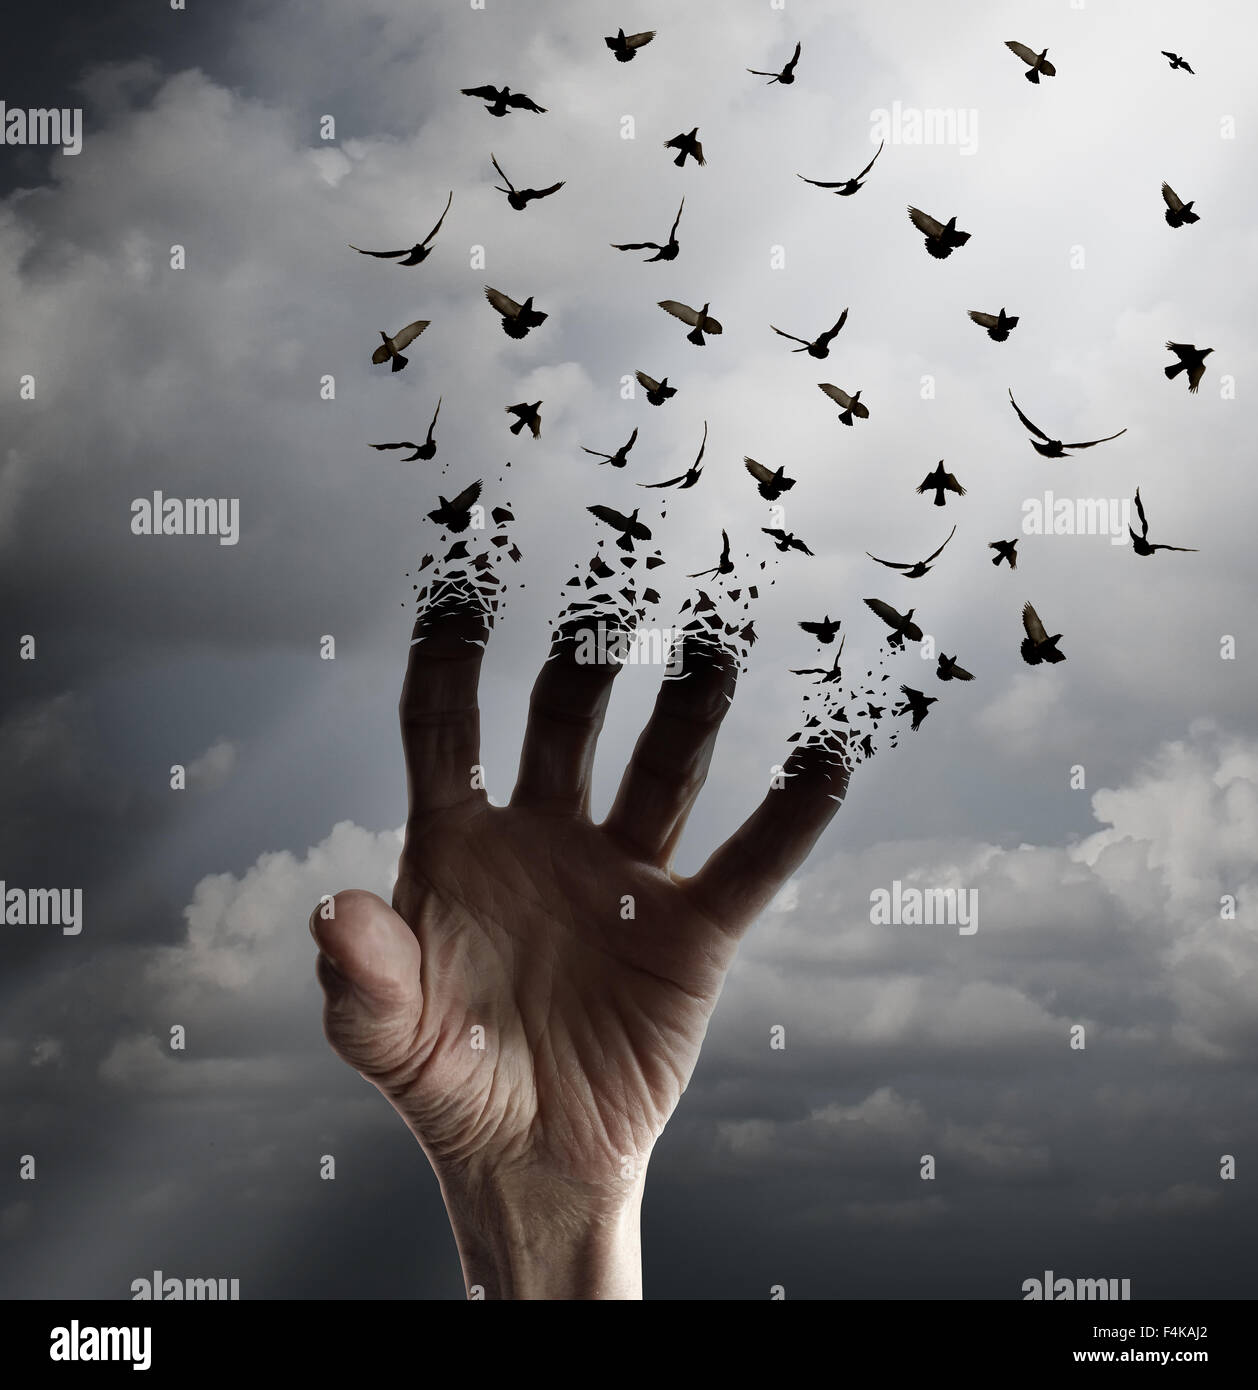 Life transformation concept as a hand reaching out tranforming into flying birds following sunlight as a freedom symbol of hope Stock Photo